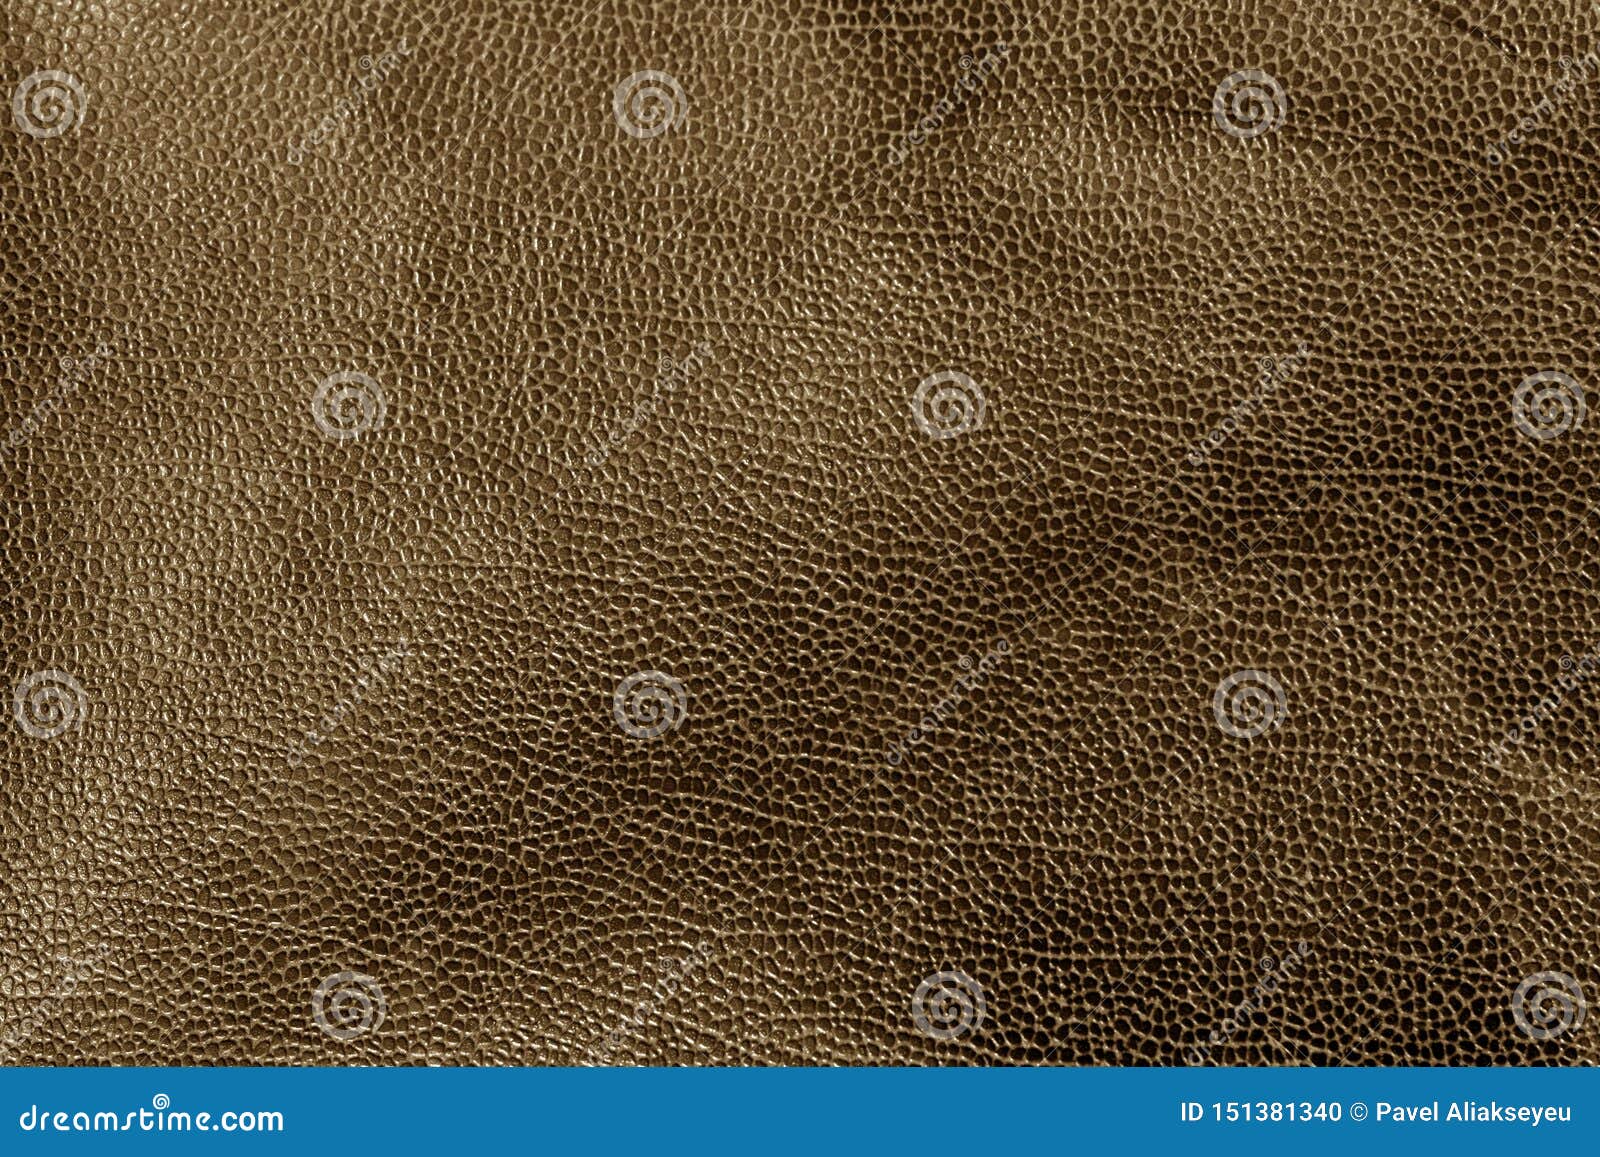 Weathered Leather Texture in Brown Tone Stock Photo - Image of luxury,  genuine: 151381340